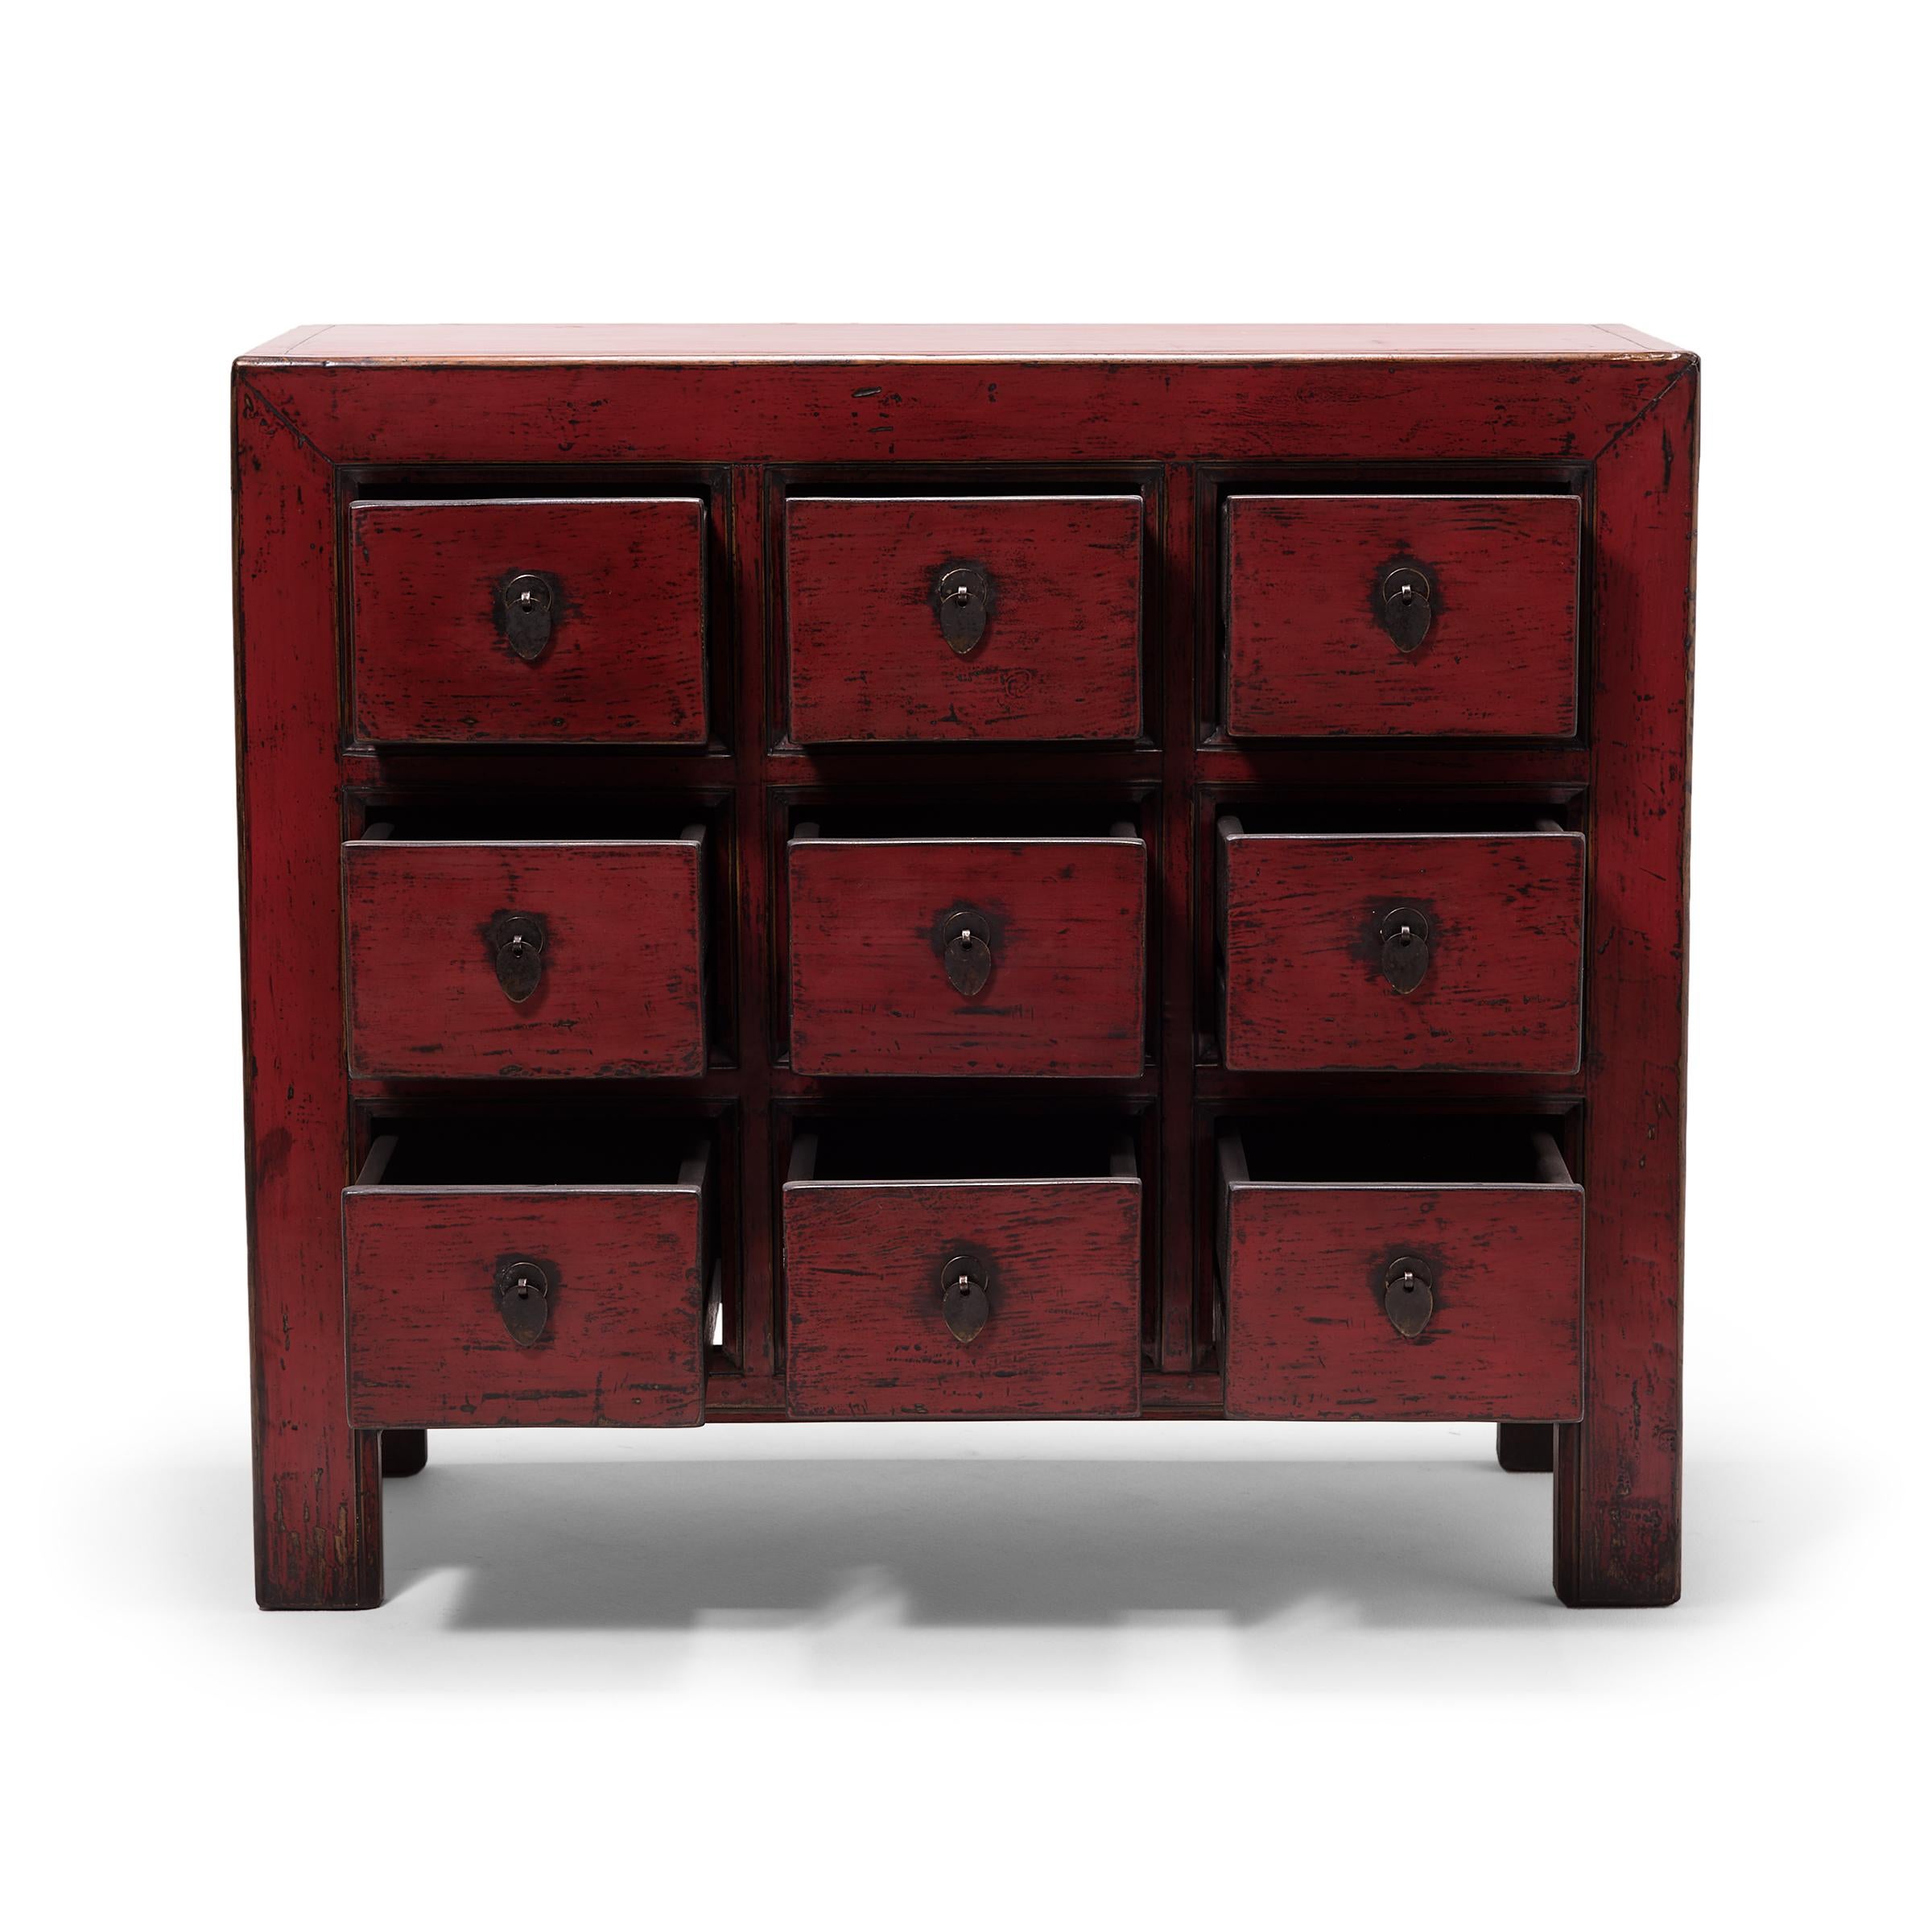 This contemporary apothecary chest is modeled after those used in Qing-dynasty pharmacies to organize and store herbal medicines. A statement piece cloaked in a crimson red lacquer, the cabinet has nine drawers, each punctuated by a teardrop brass